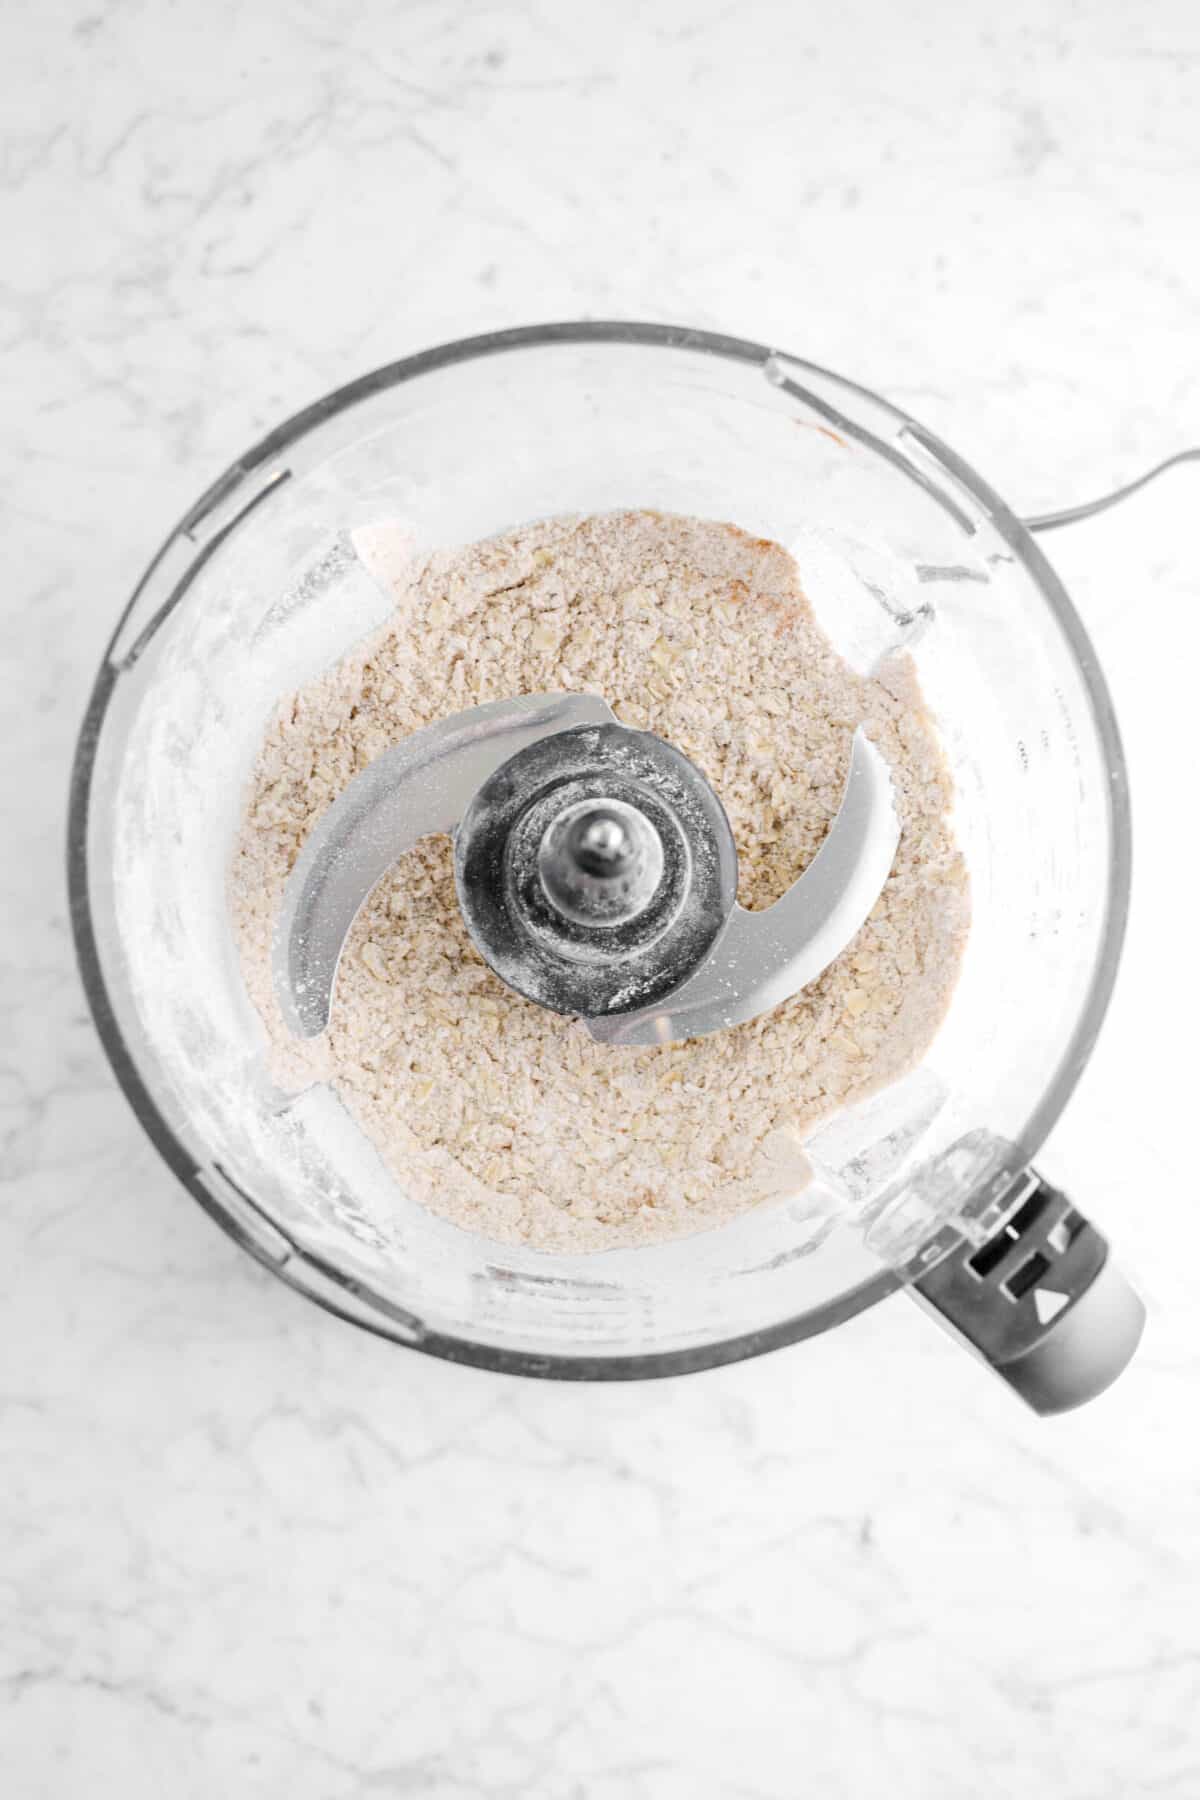 dry ingredients blended together in a food processor